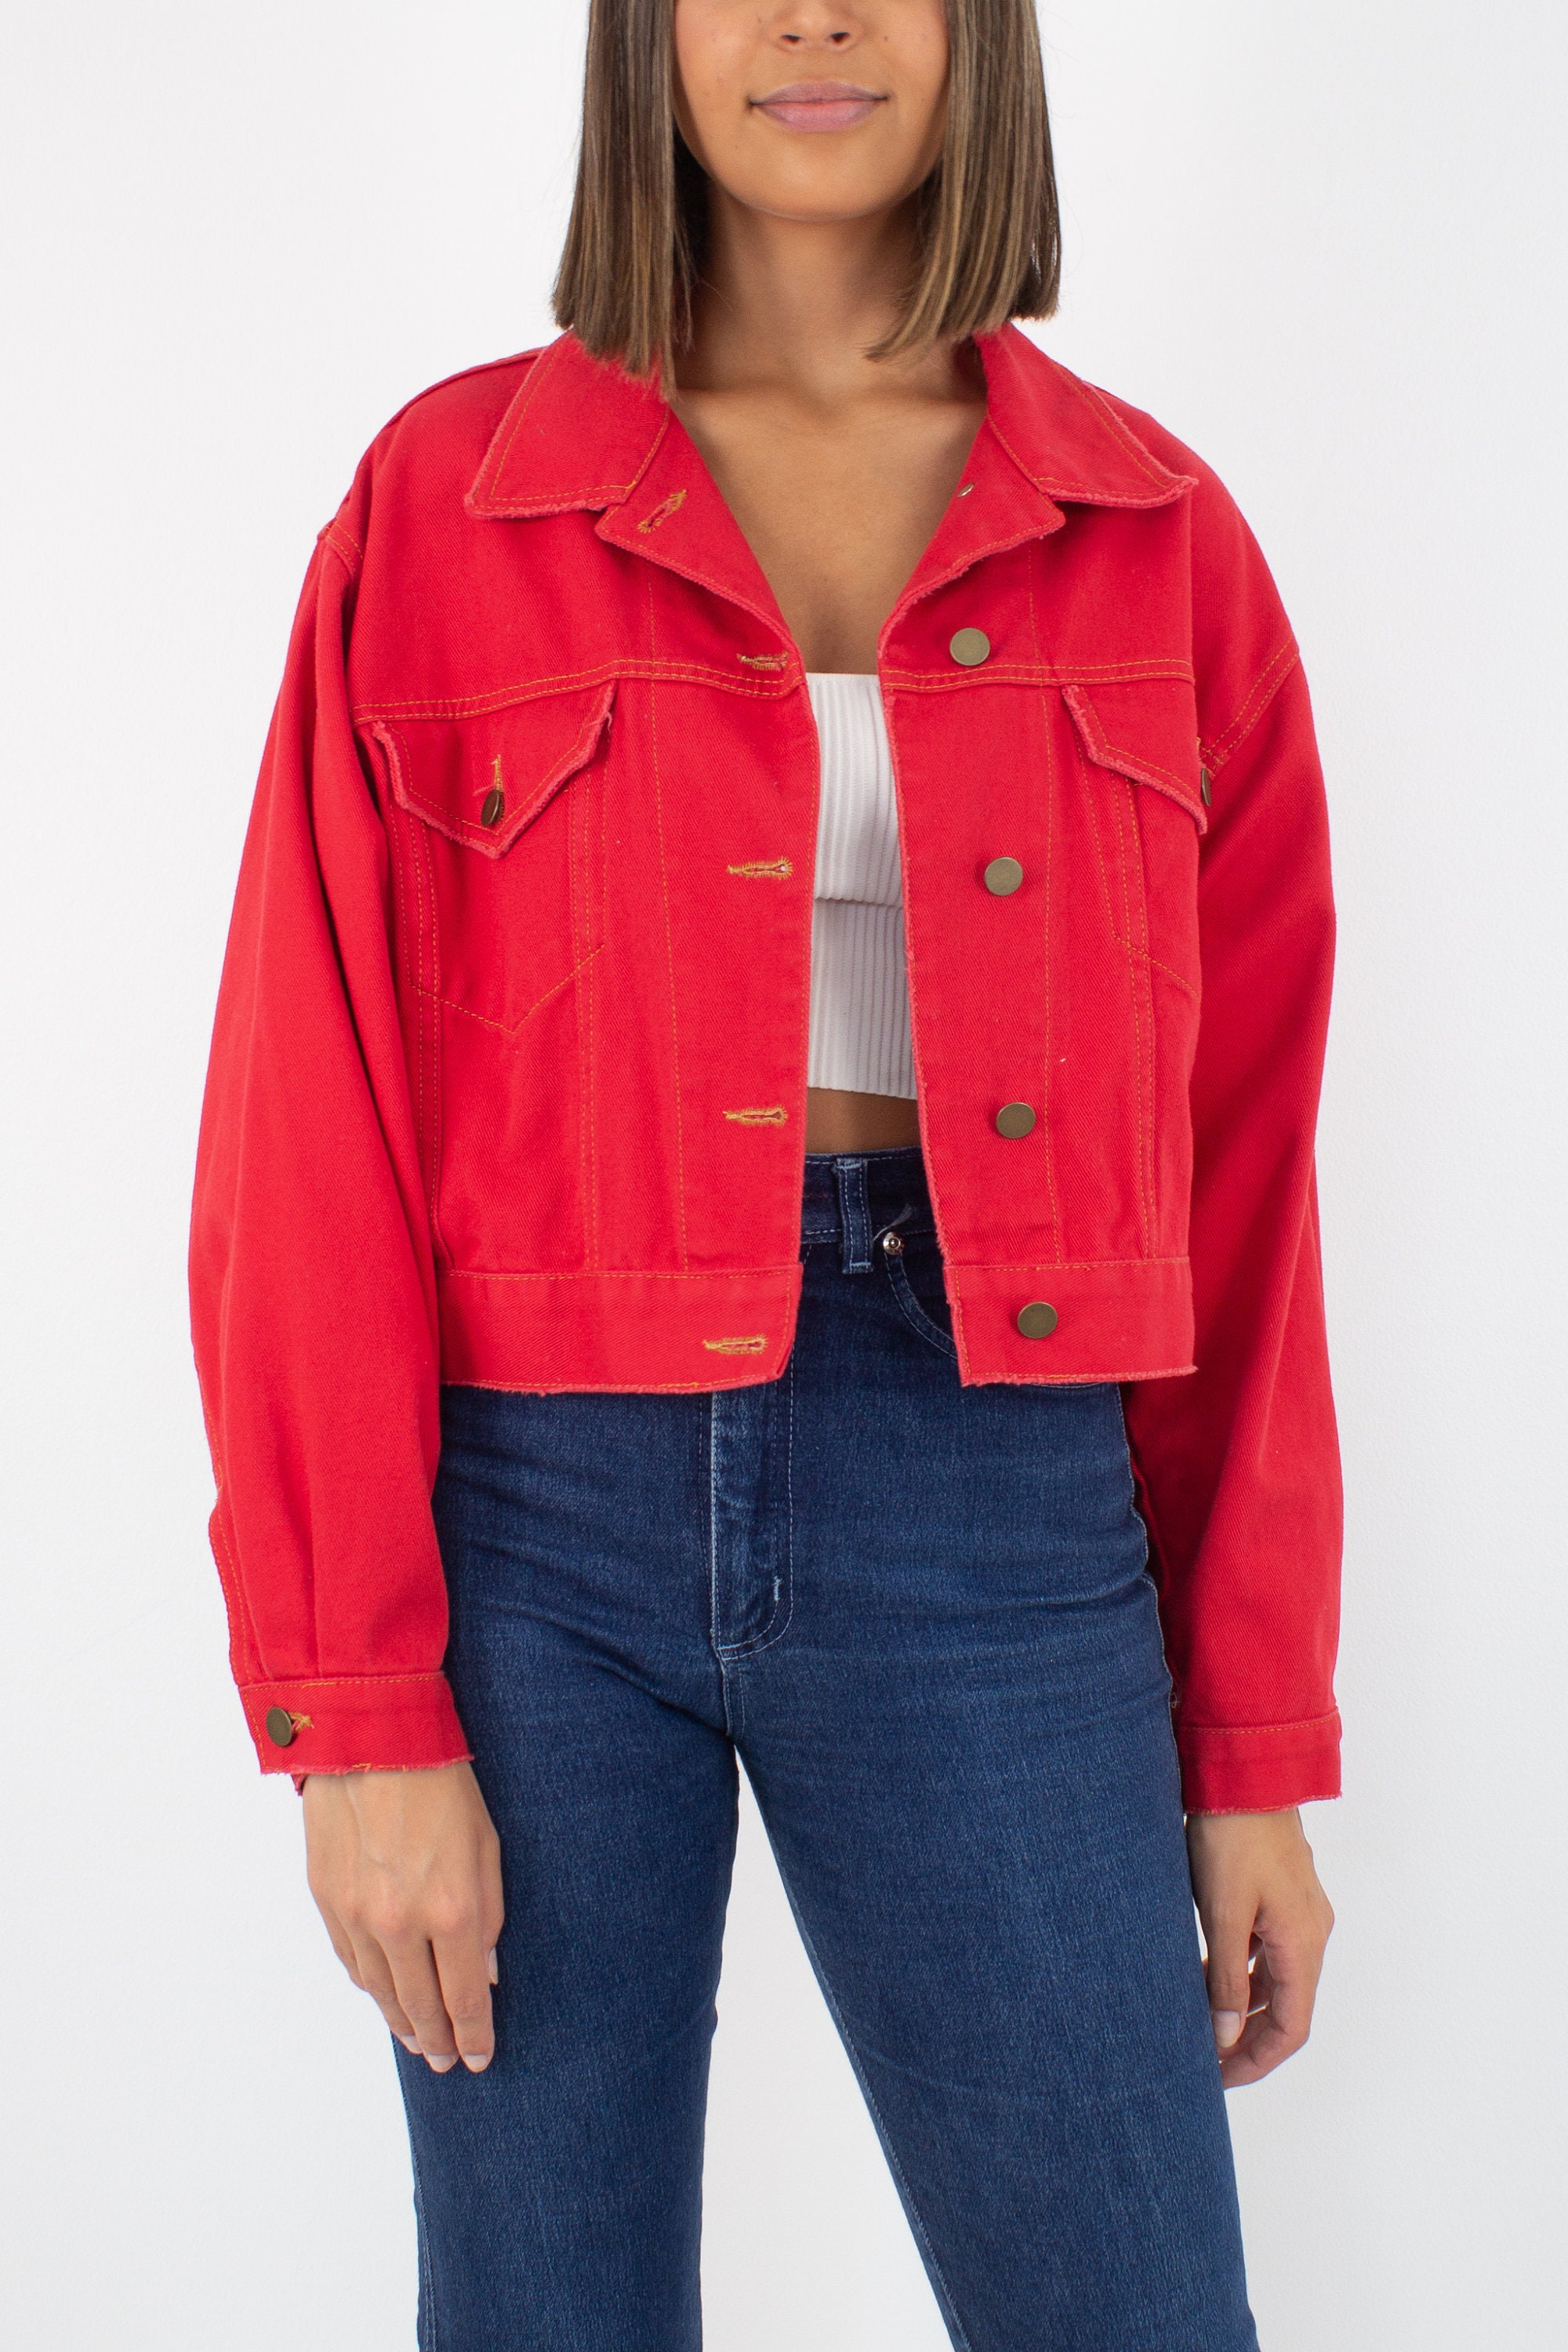 80s 1980s Bright Red Cropped Denim Jacket Free Size XS/S/M/L - Etsy